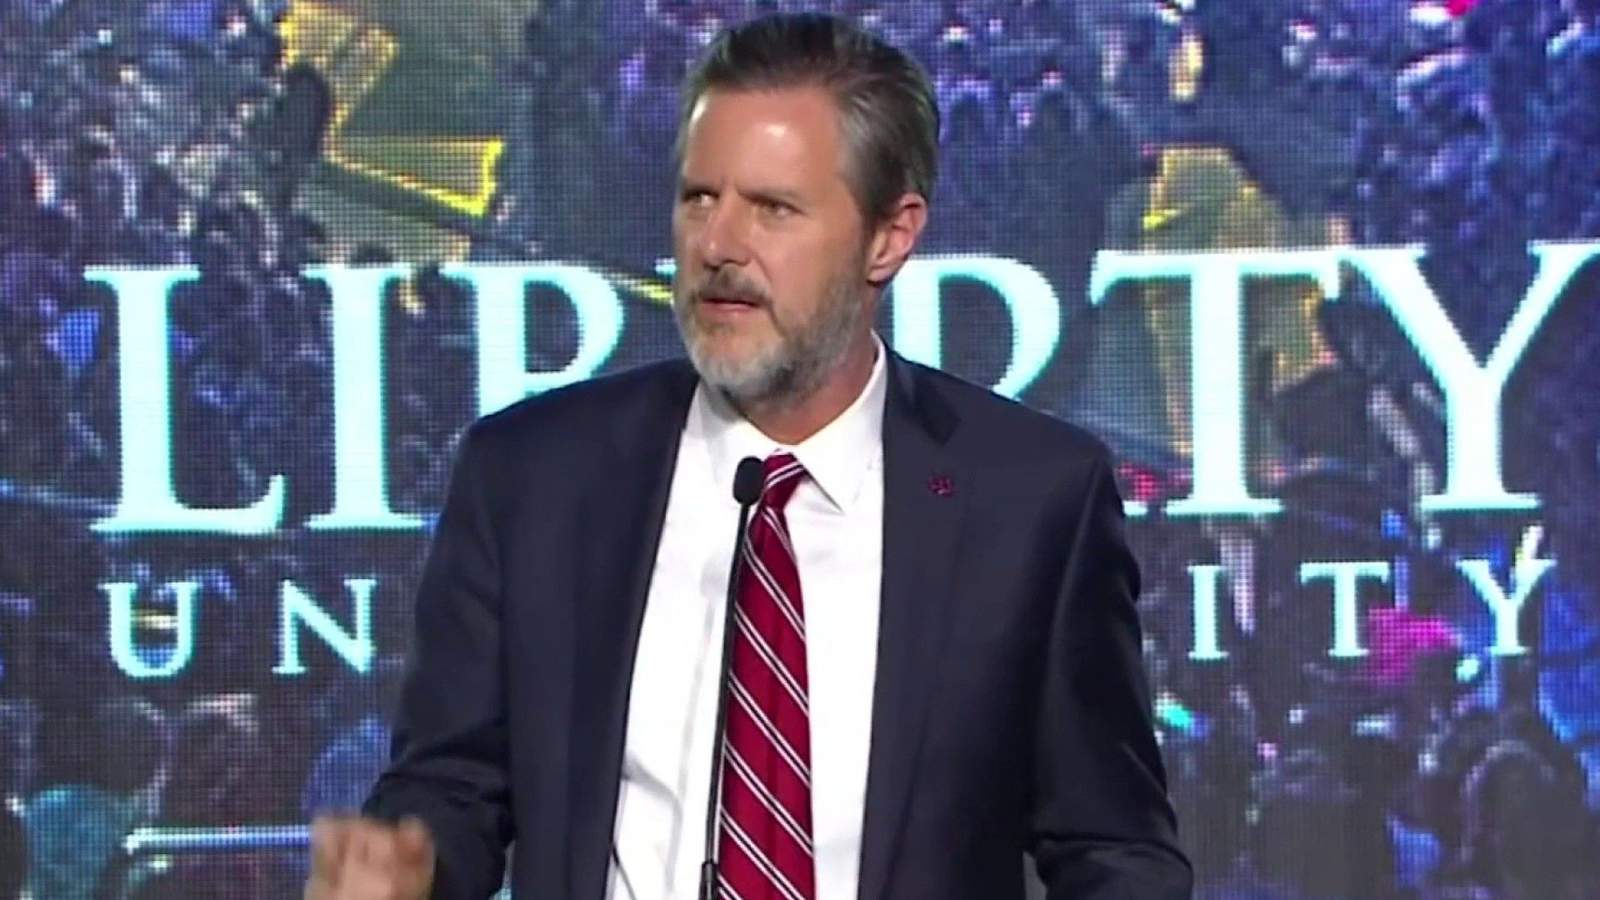 Jerry Falwell Jr. tells WSJ he has resigned amidst conflicting reports